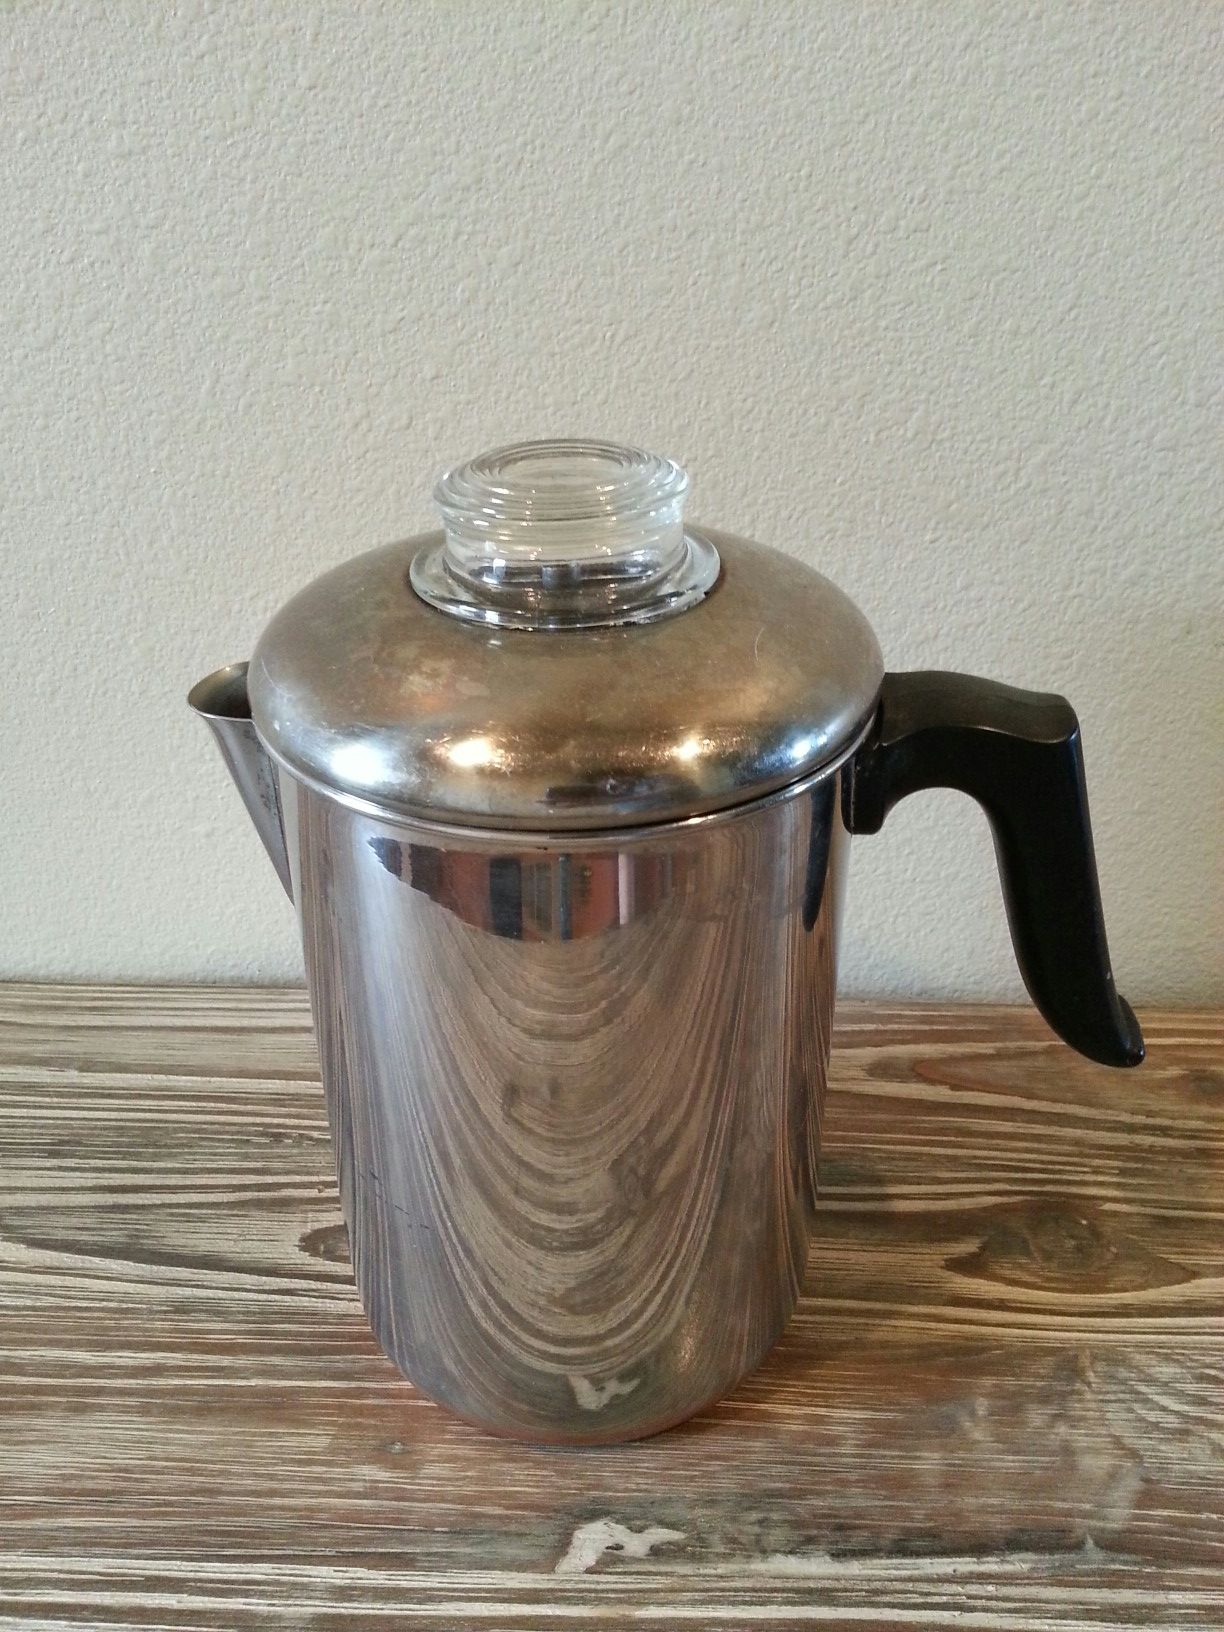 USA MADE Vintage coffee pot 8 cup revere ware excellent condition